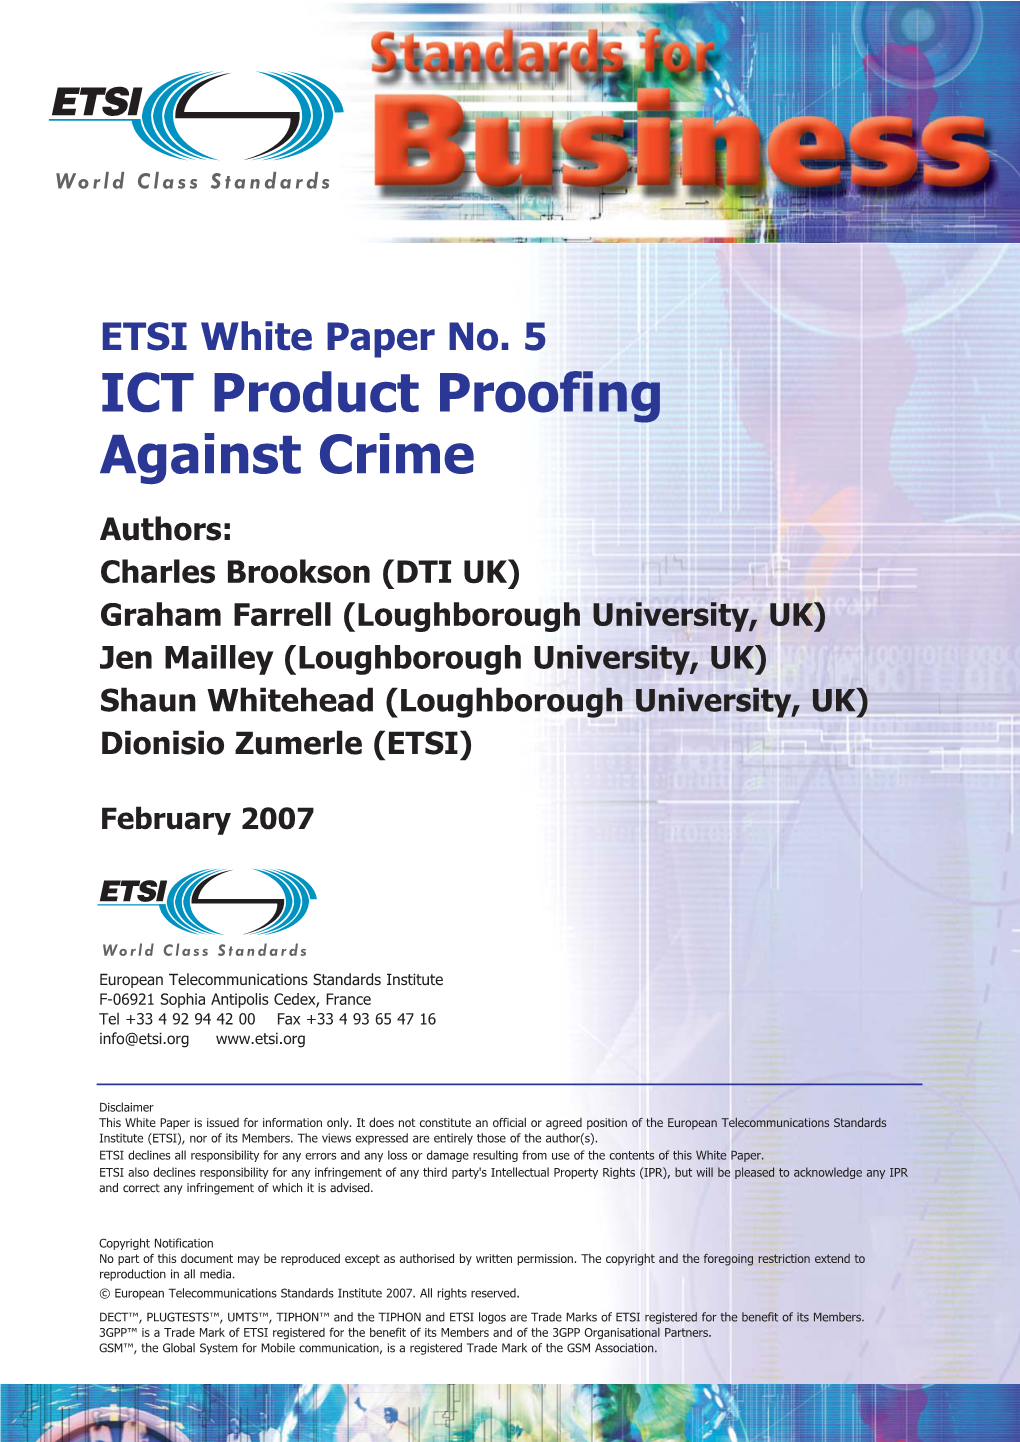 ETSI White Paper No. 5 ICT Product Proofing Against Crime